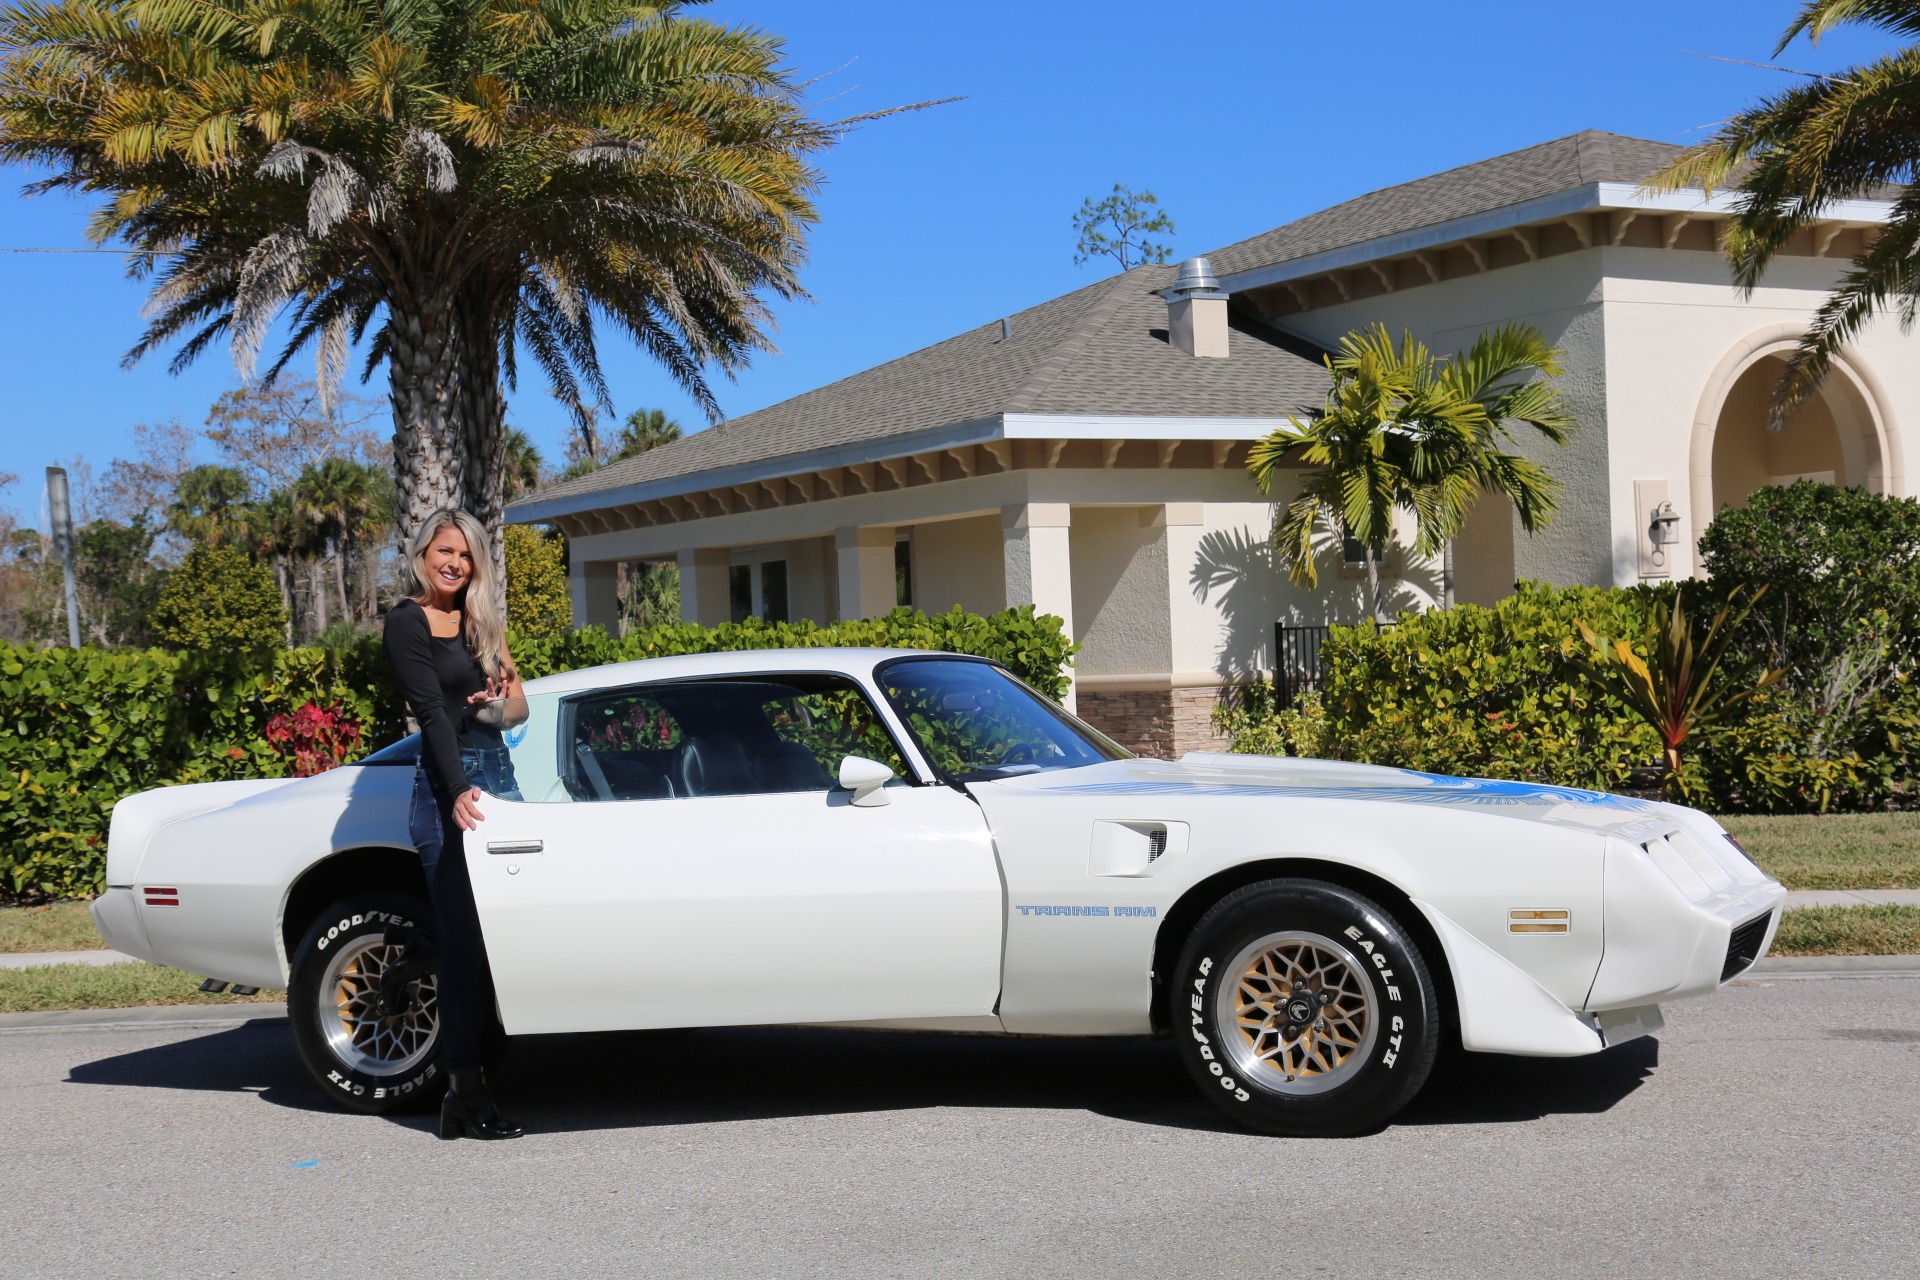 Used 1980 Pontiac Ttrans Am Trans Am for sale Sold at Muscle Cars for Sale Inc. in Fort Myers FL 33912 3